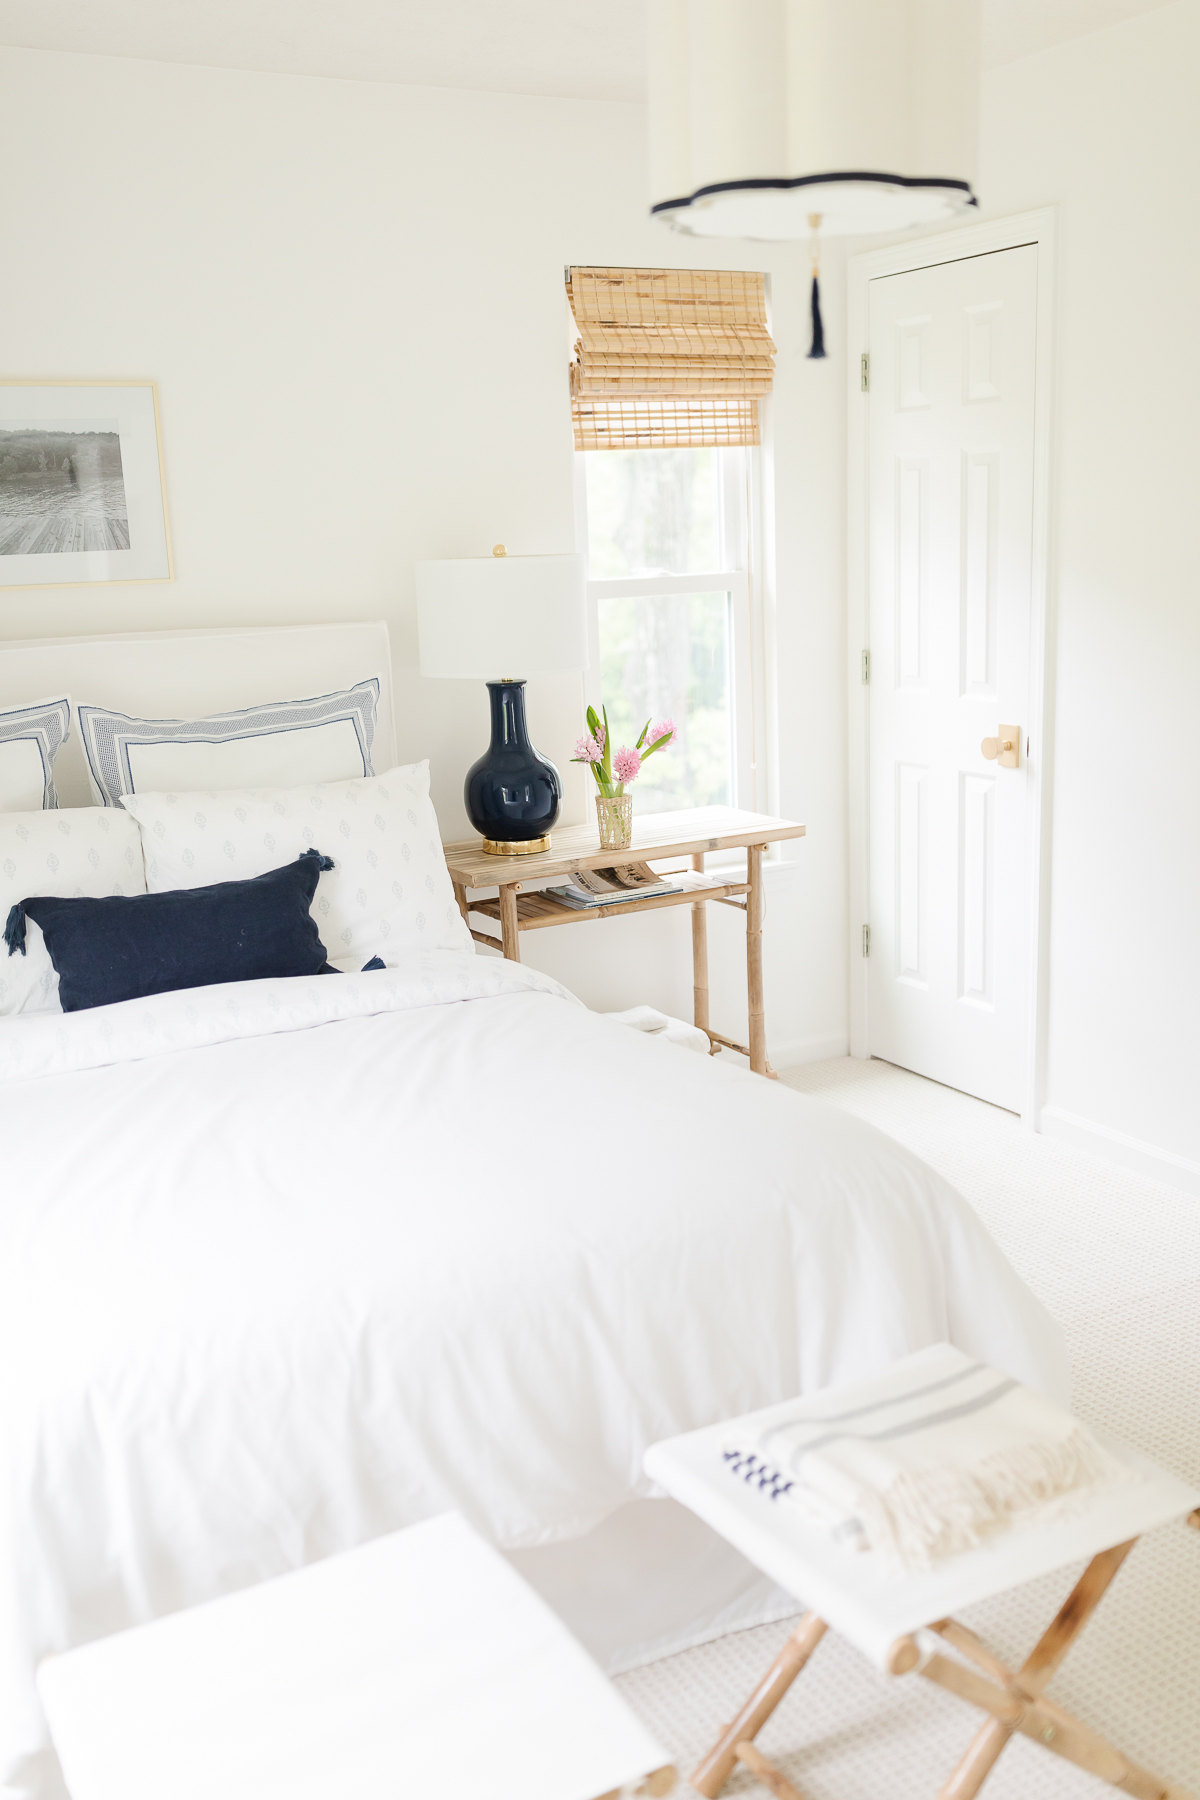 A white bed in a small bedroom.